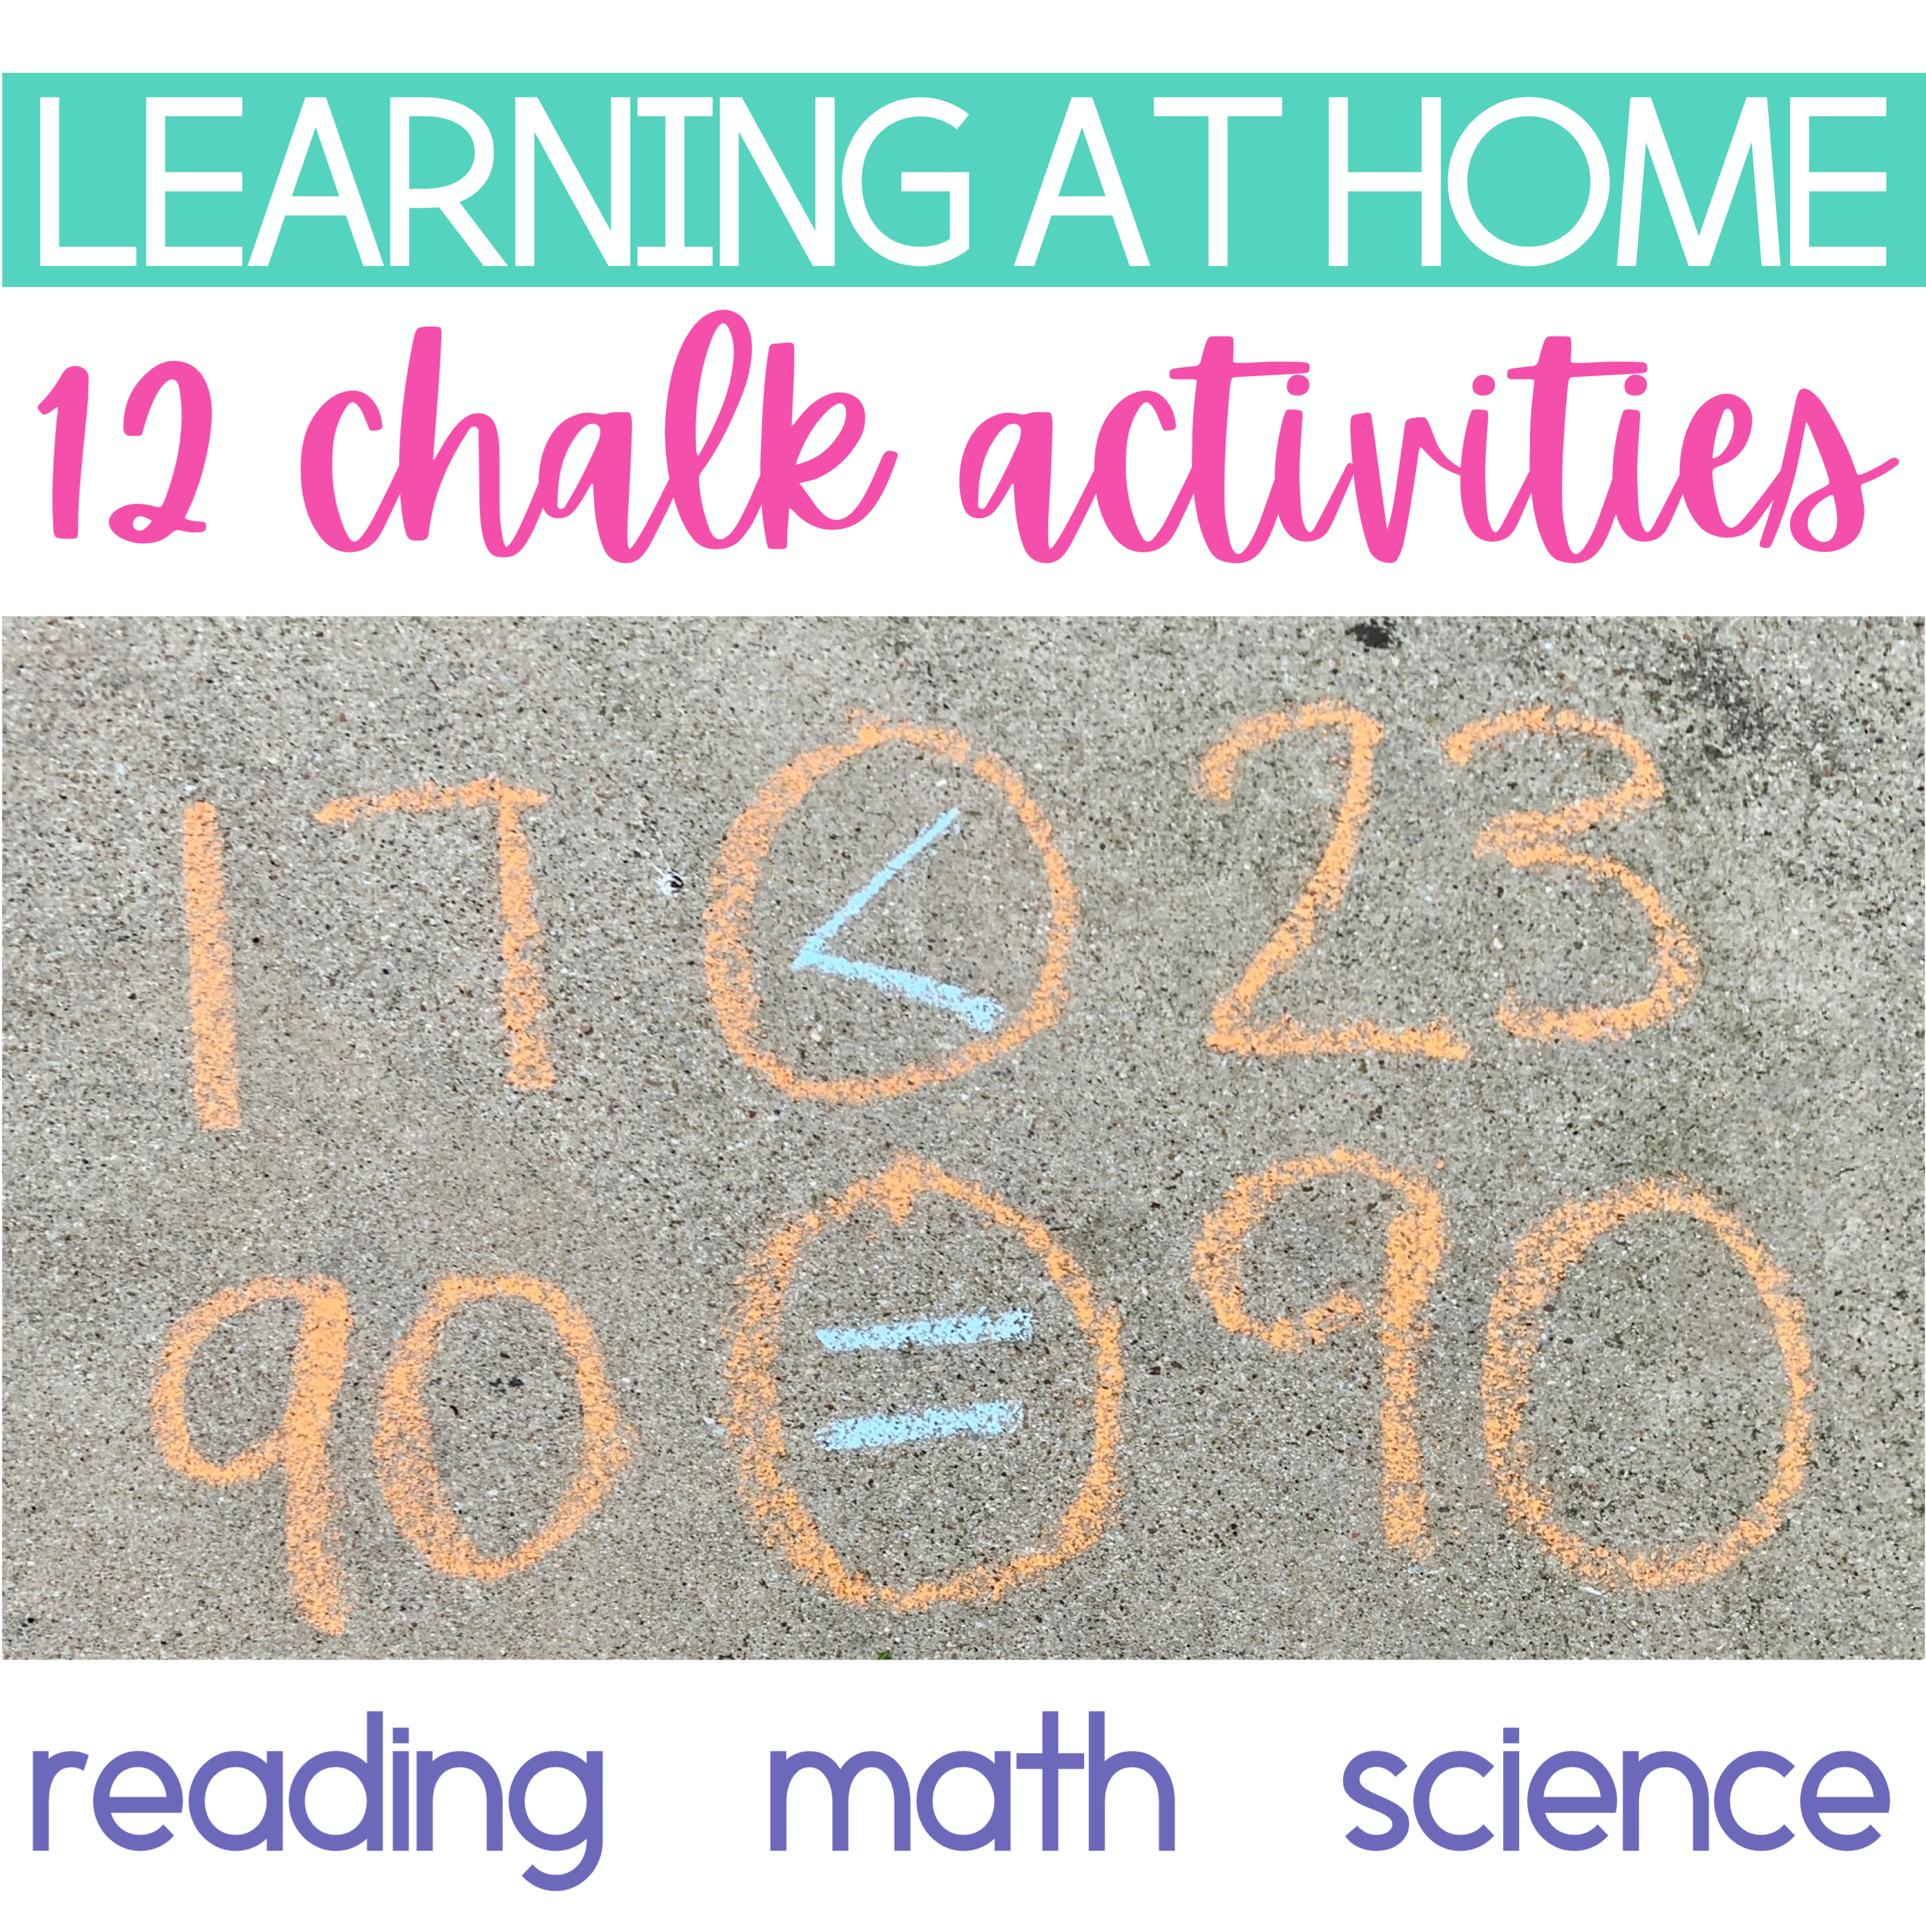 learning at home with chalk; reading math and science activities to complete with sidewalk chalk